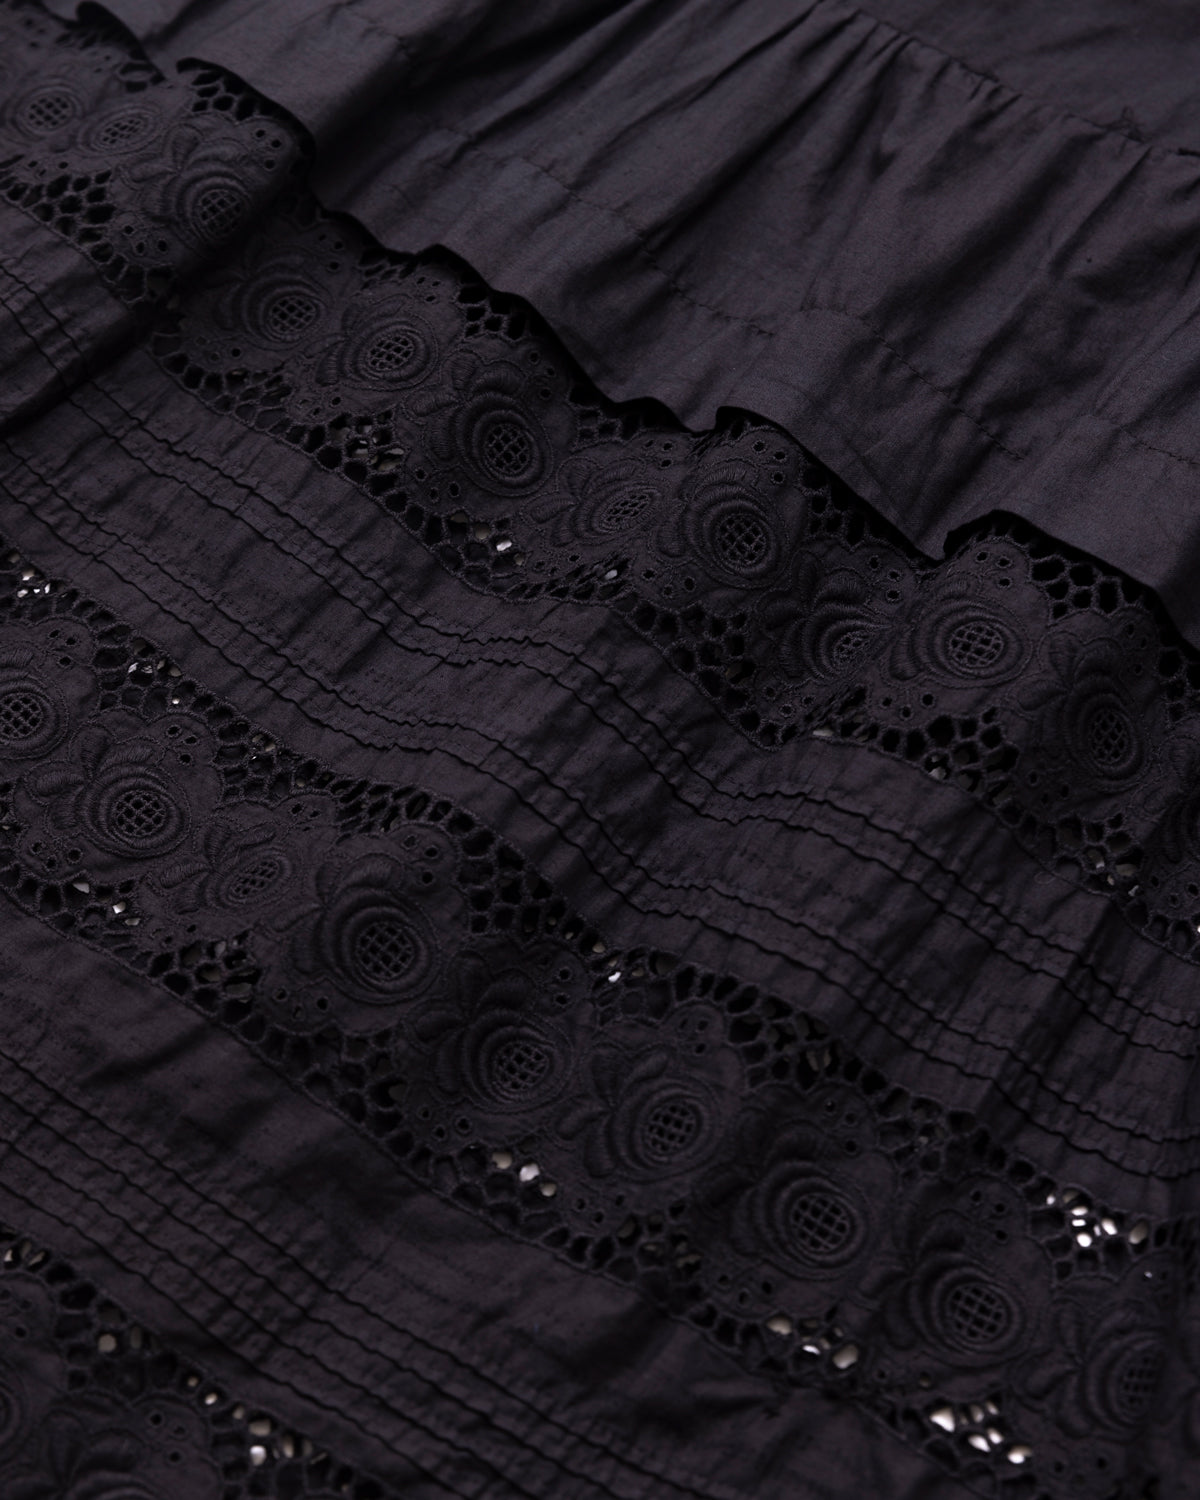 French Antique Cotton Lacy Dress #2 / Black Dyed